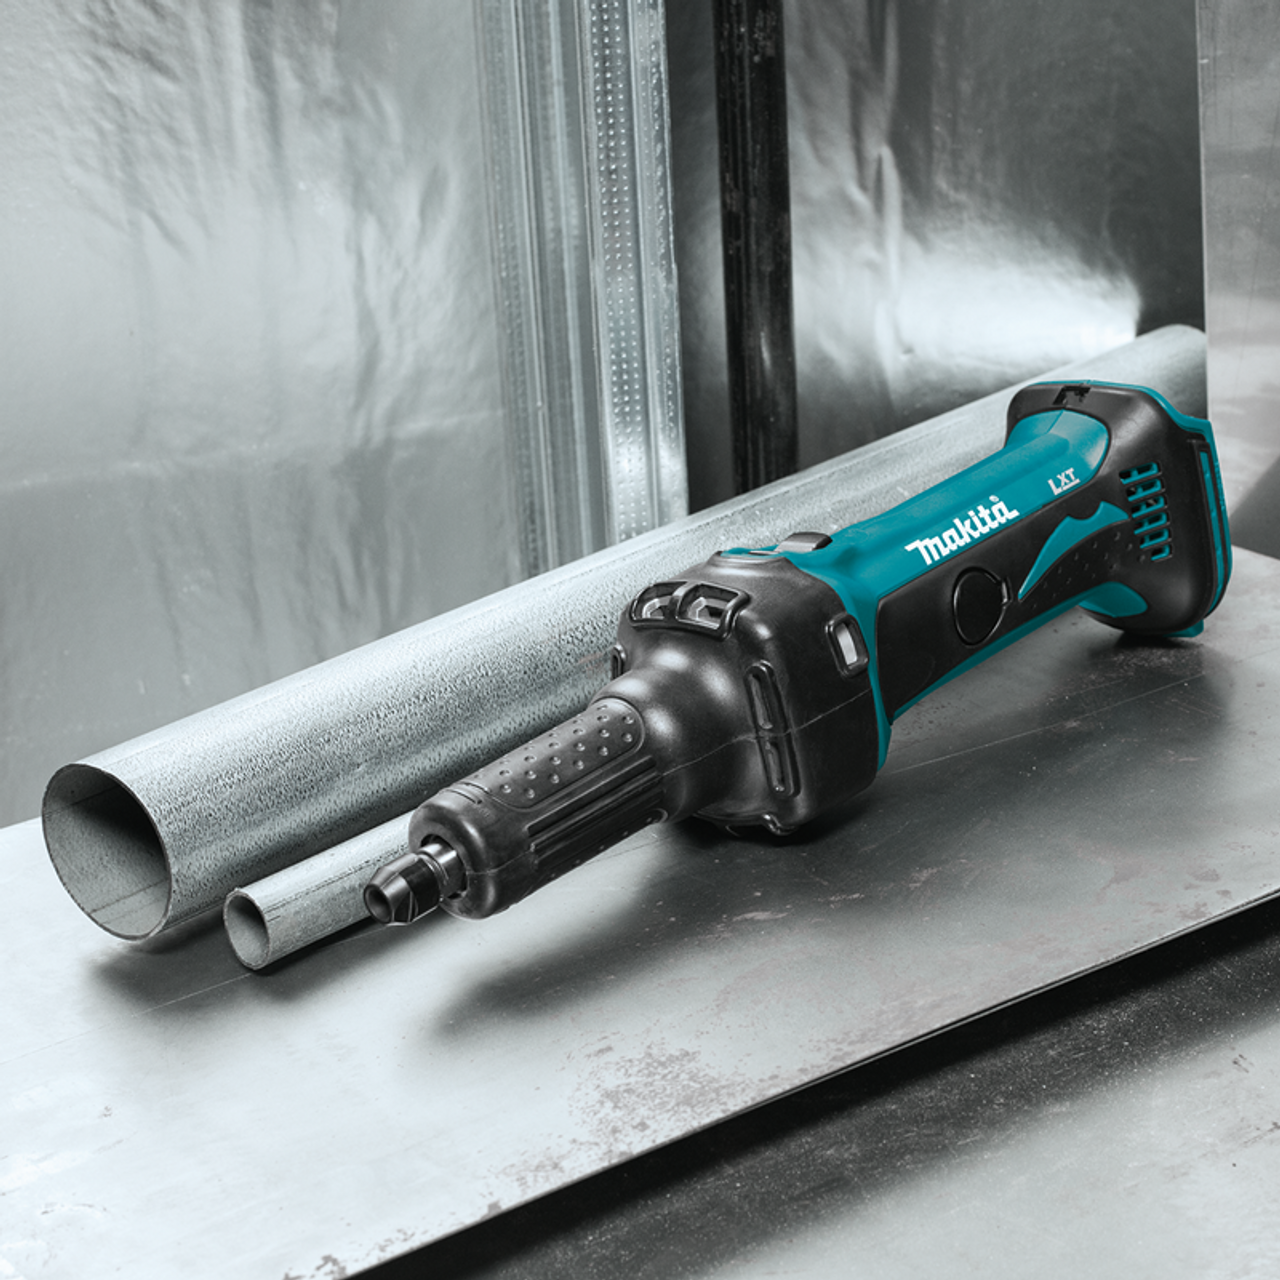 18V LXT? Lithium-Ion Cordless 1/4" Die Grinder, Tool Only, Makita-built motor , XDG01Z